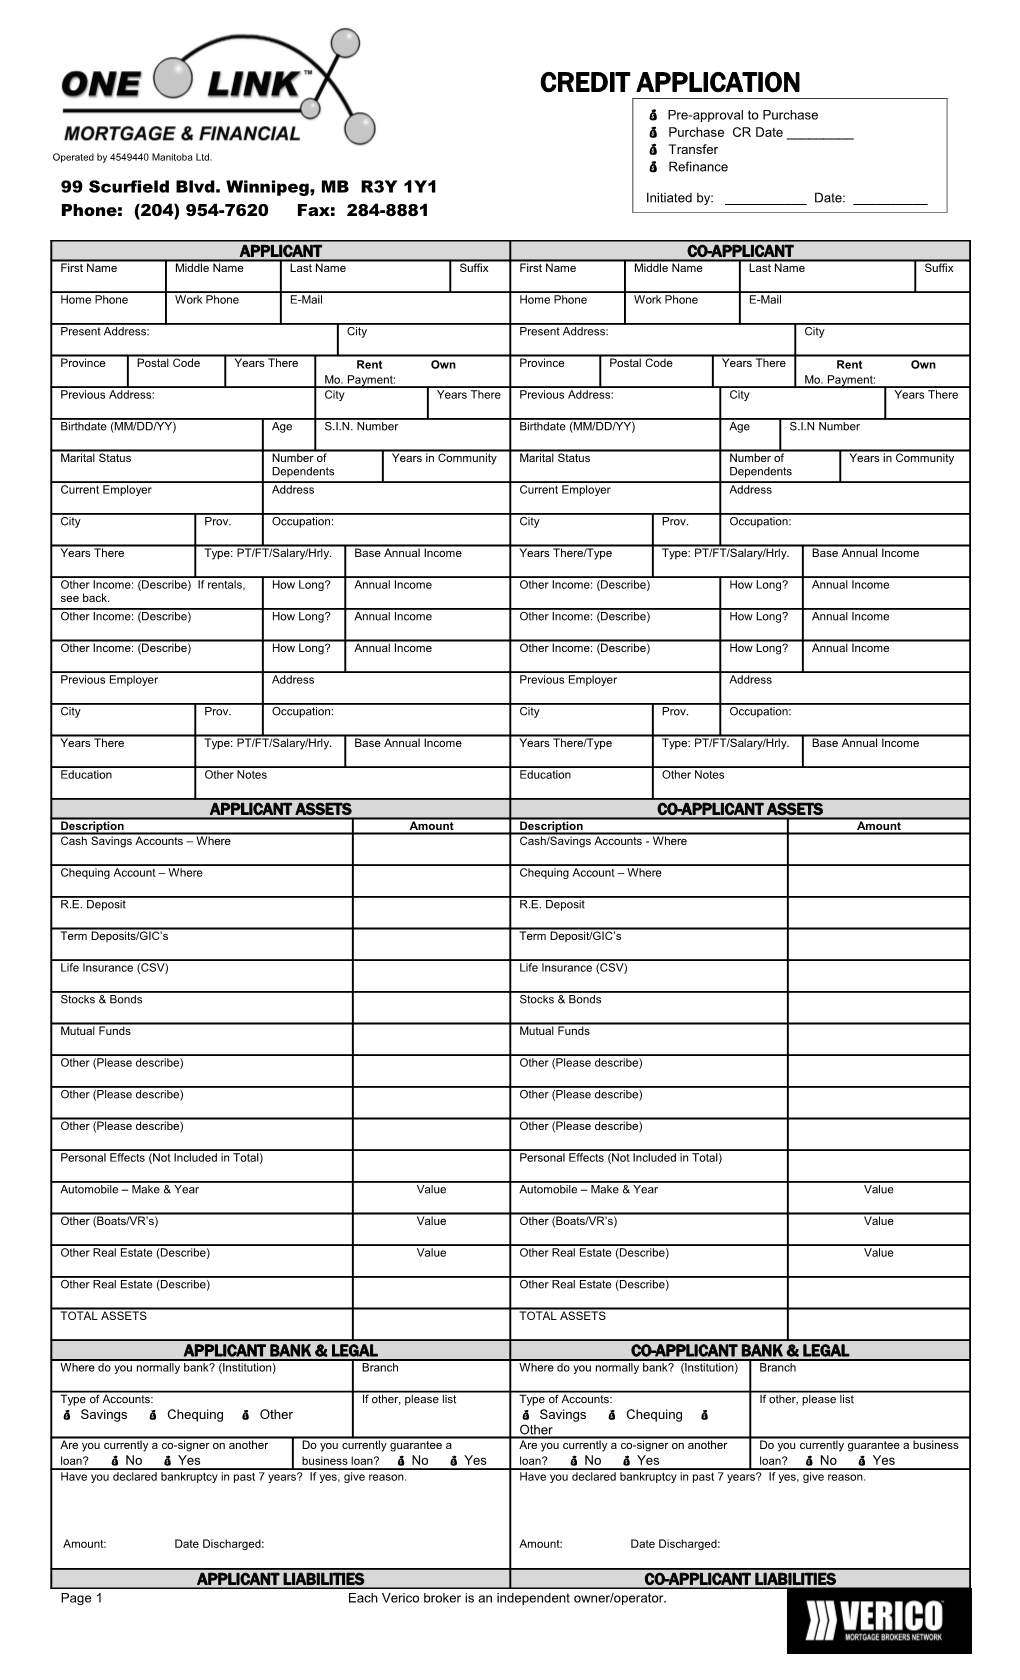 Verico One-Link Mortgage & Financial Corporation Credit Application Form (Continued)